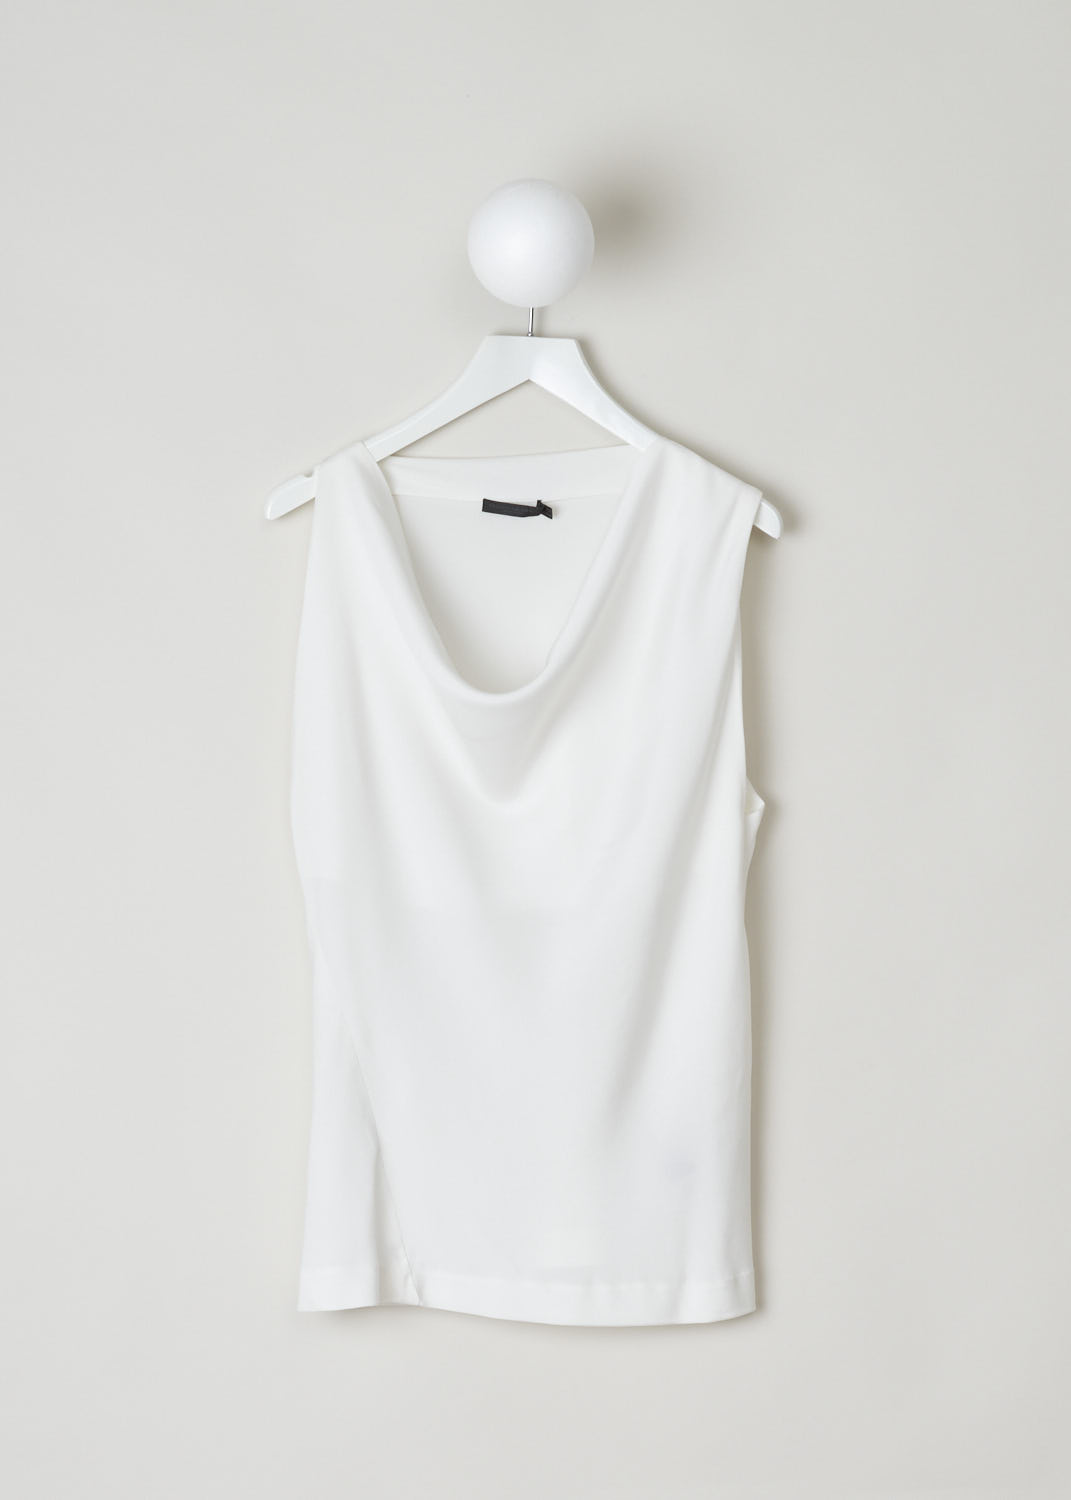 DONNA KARAN, SLEEVELESS COWL NECK TOP, A42T259MB0_132, White, Front, This white sleeveless top has a cowl neckline. This lightweight garment has a slightly askew seam on one side.
